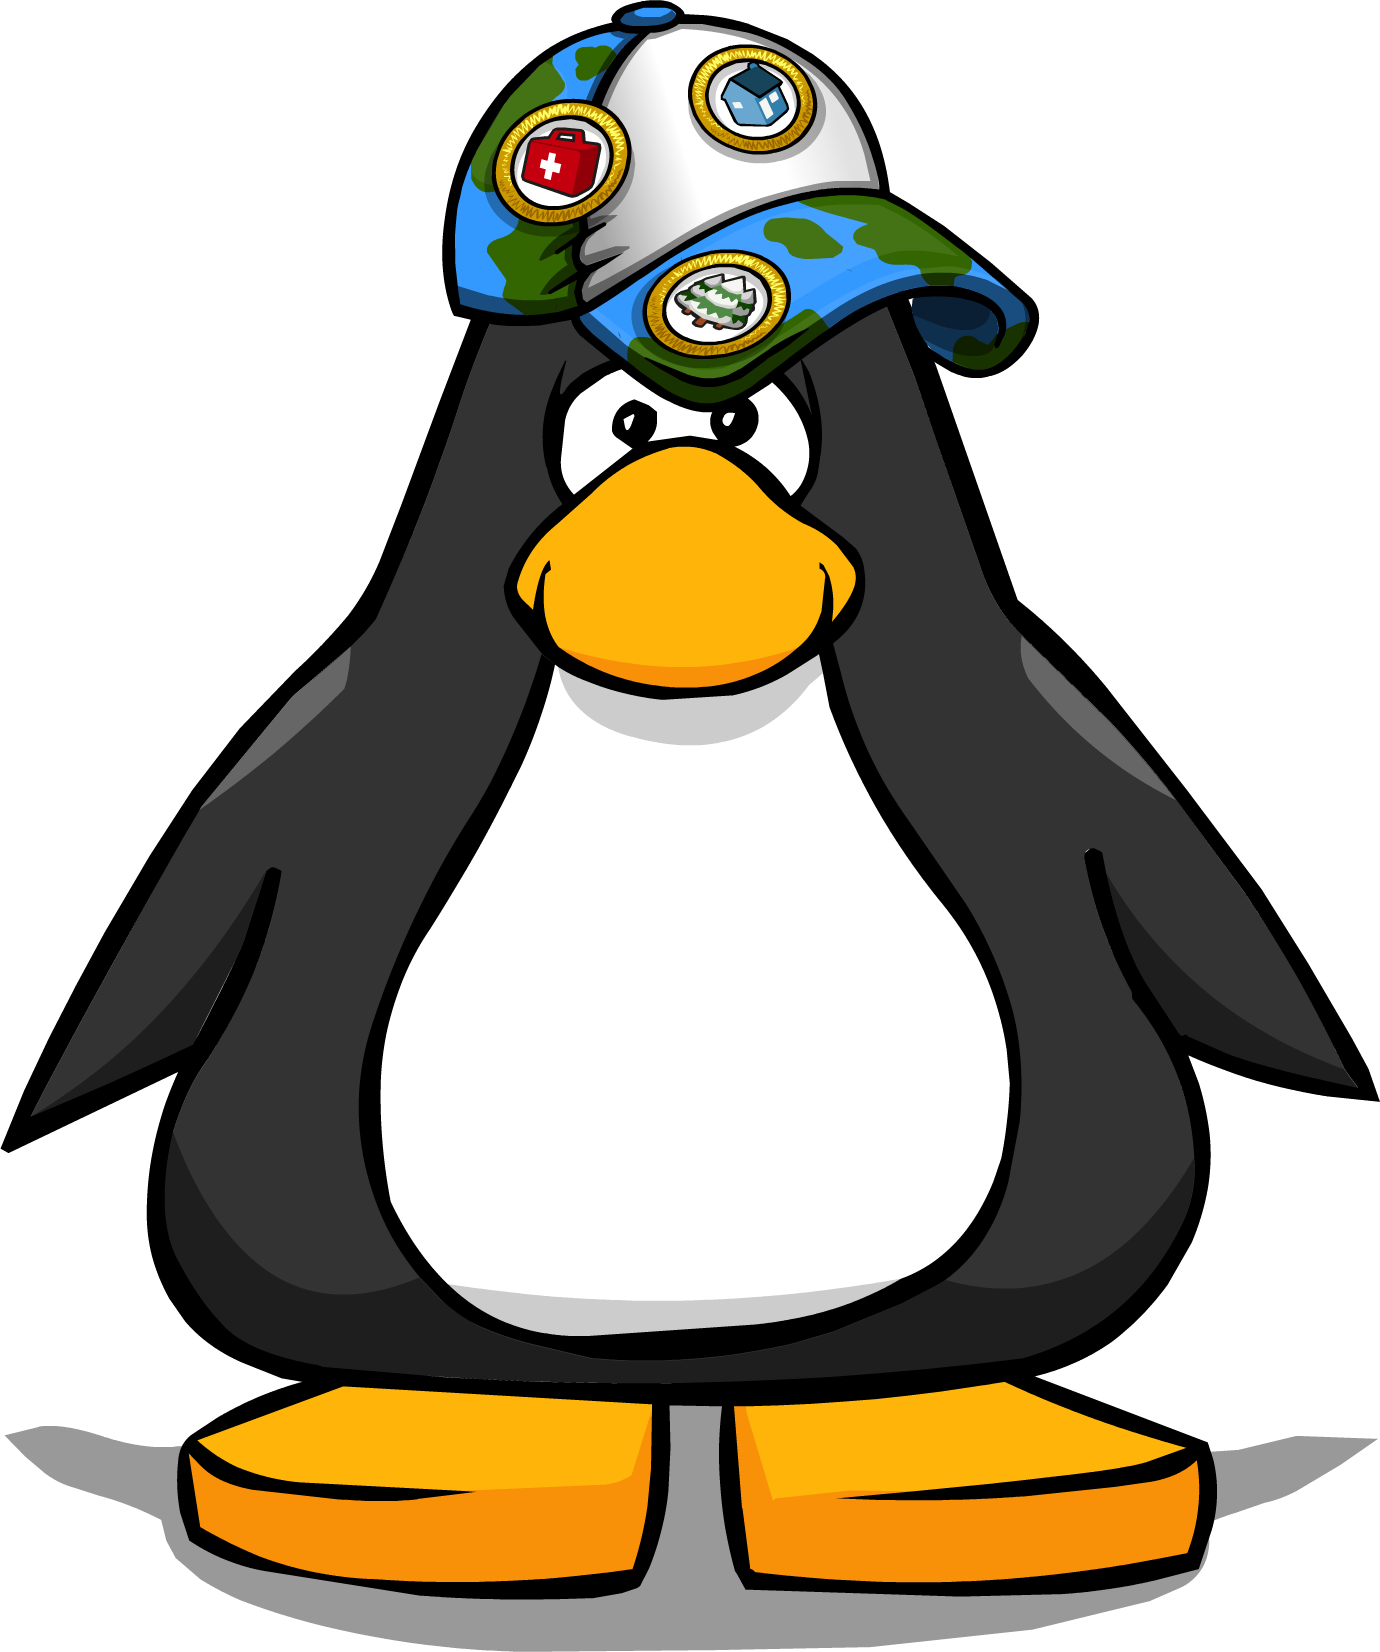 Coins For Change Cap From A Player Card - Club Penguin With Hat (1380x1652)